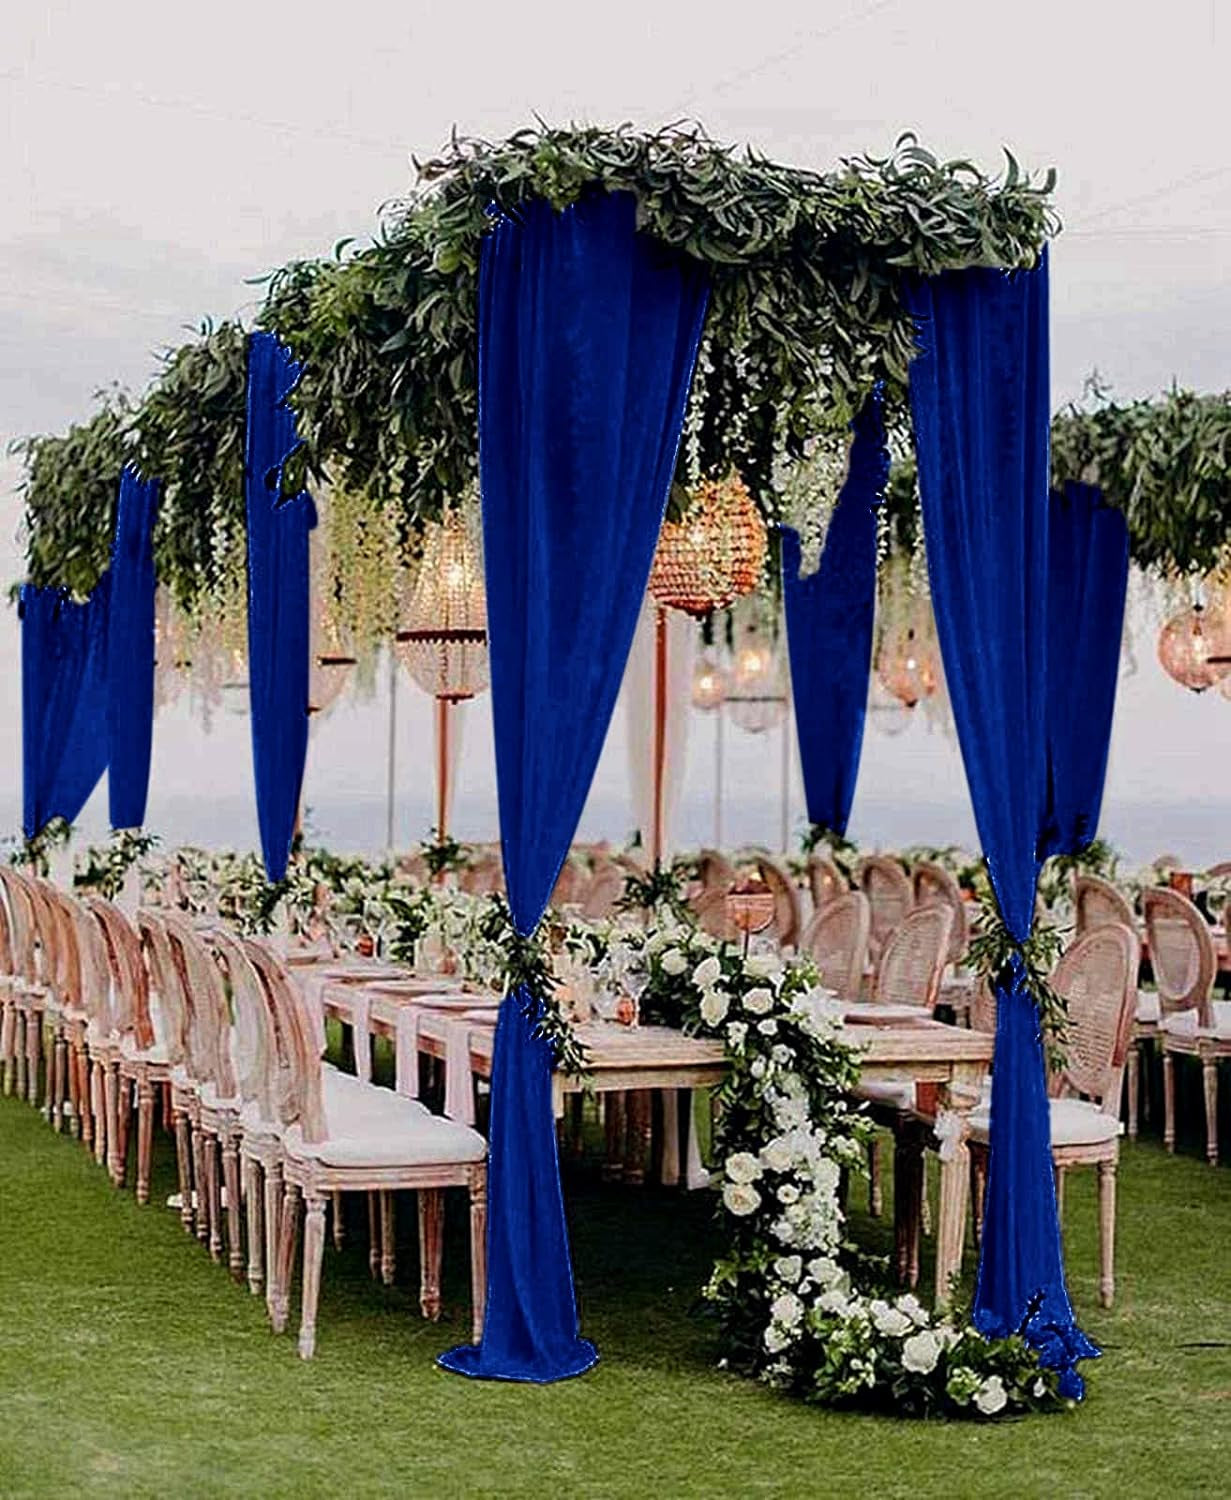 Chiffon Backdrop Curtain 5Ftx9Ft Royal Blue Voile Sheer Curtains 2 Panels Romantic Wedding Party Decor Polyester Chiffon Fabric Drapes for Party Stage(5Ftx9Ft(29"X108"X2), Royal Blue)